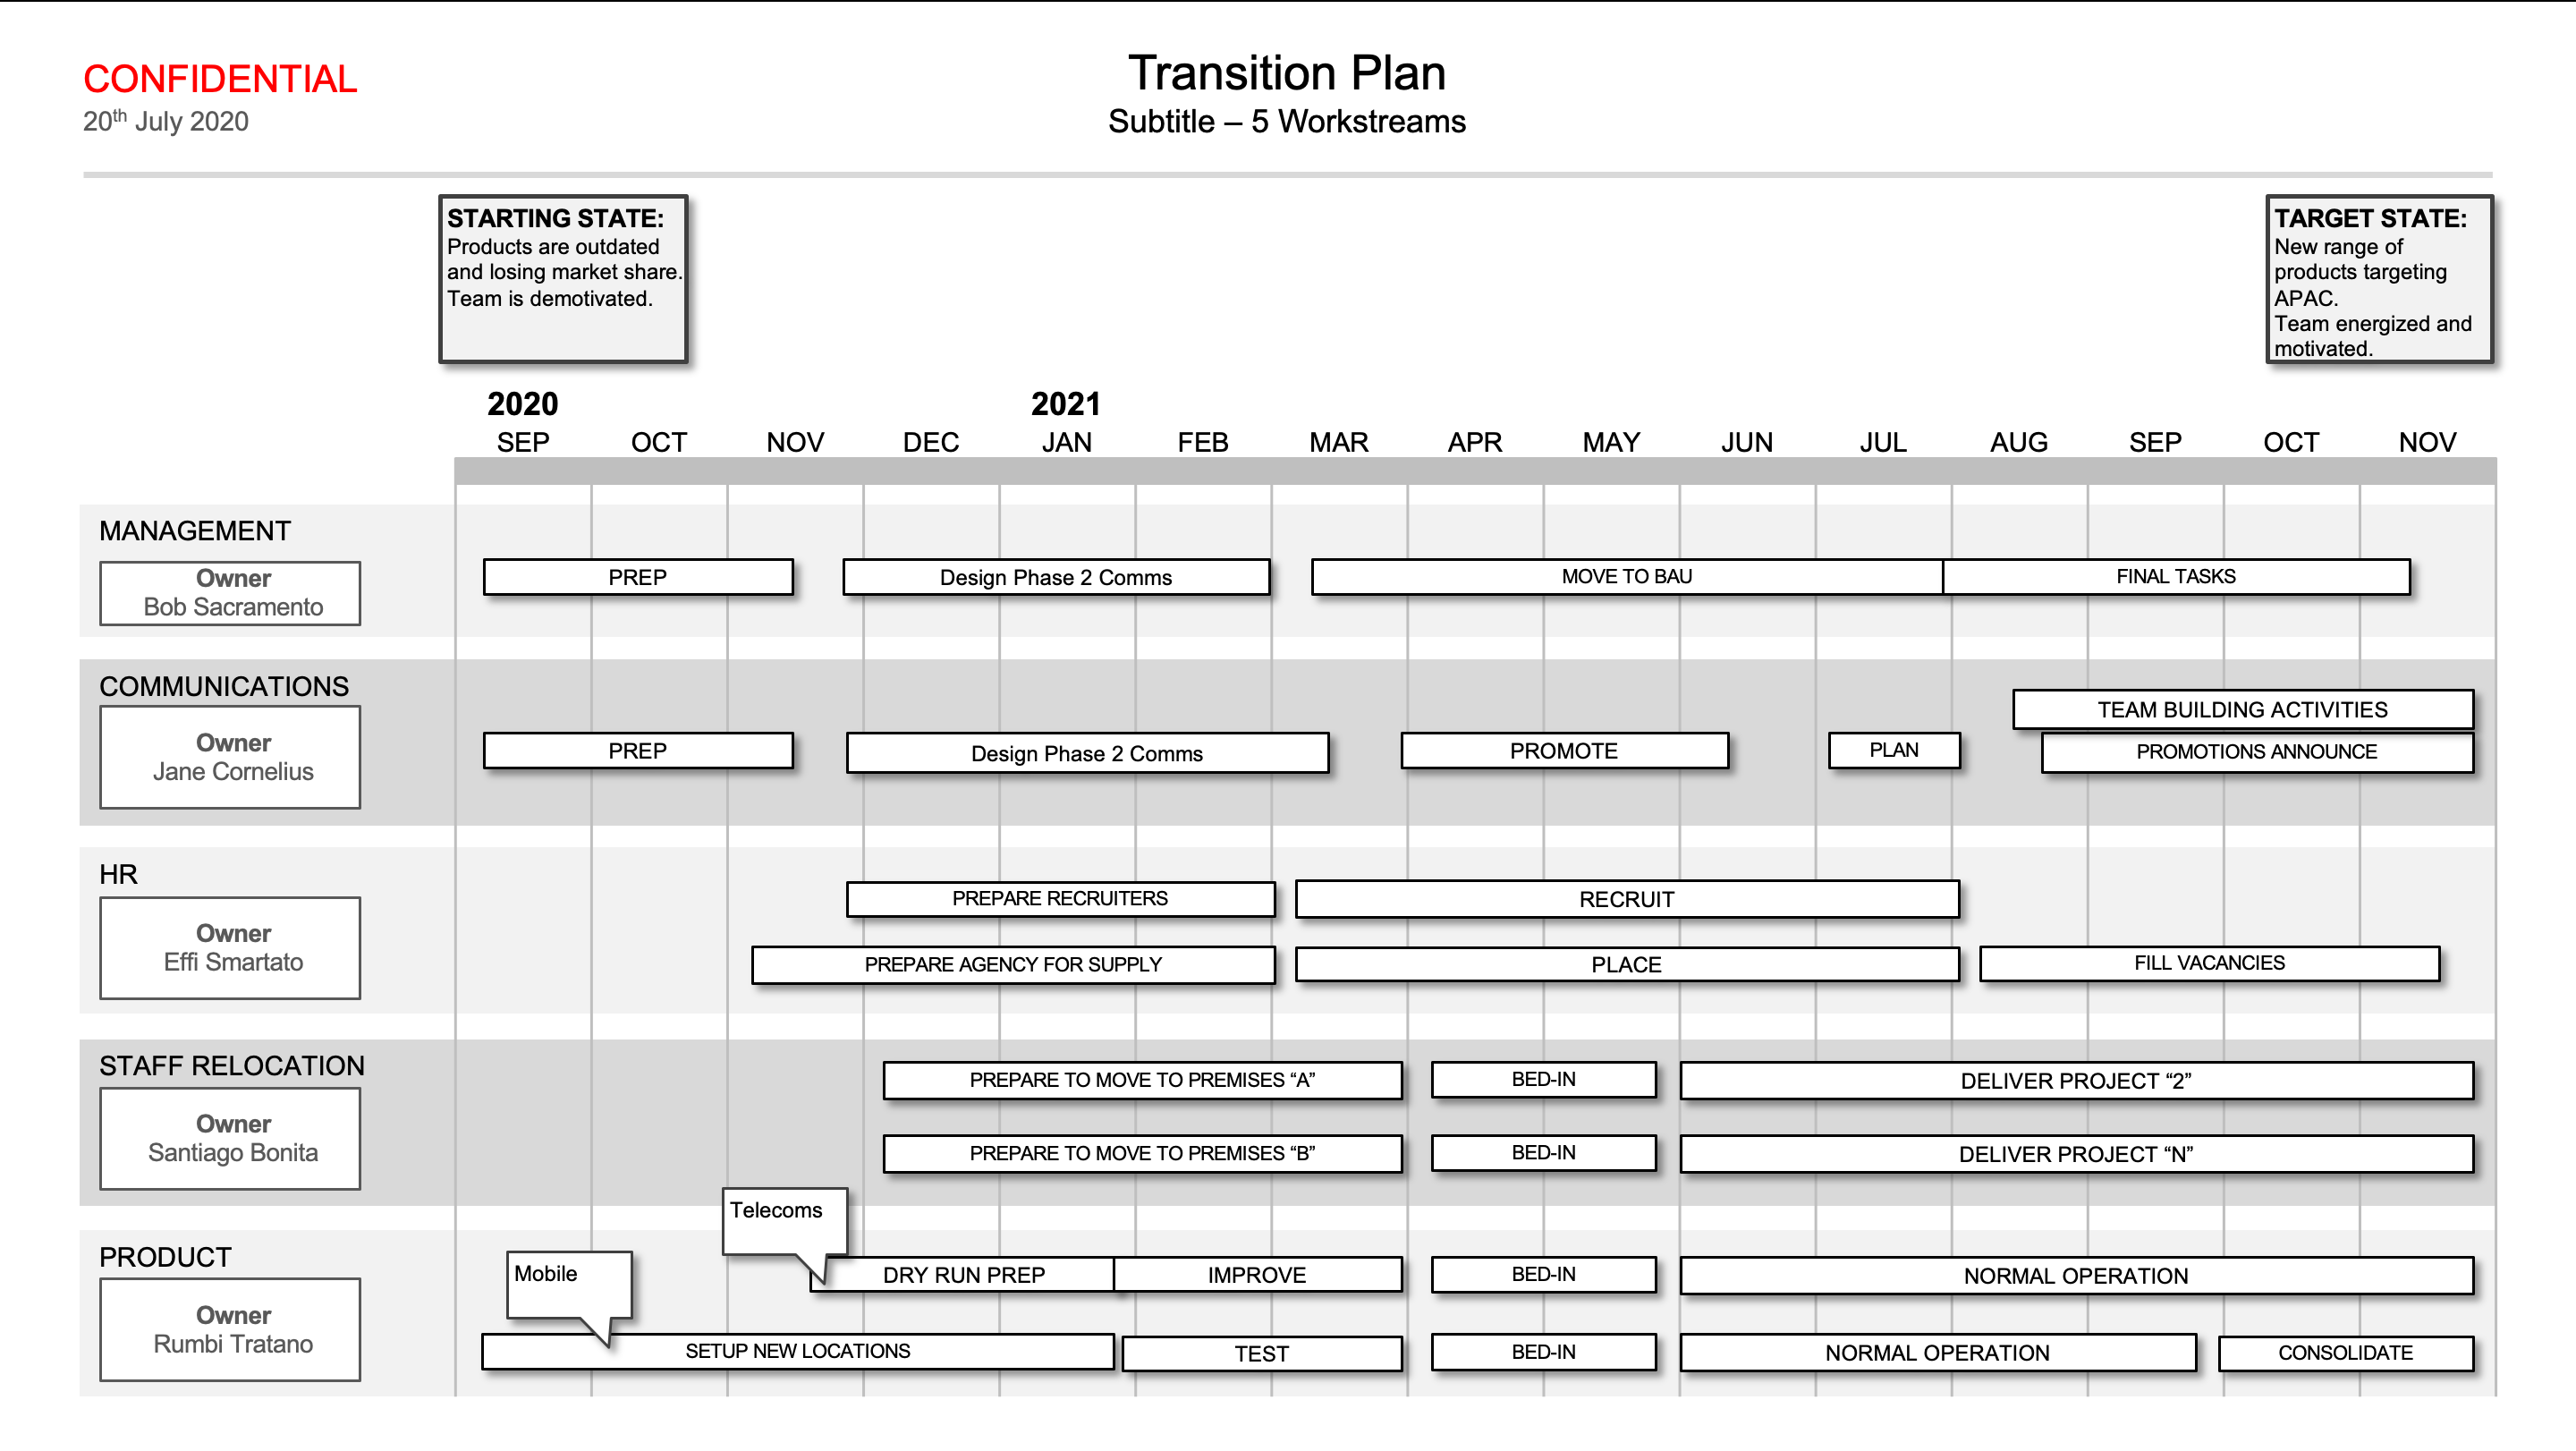 Transition Plan showing the tasks in each workstream area